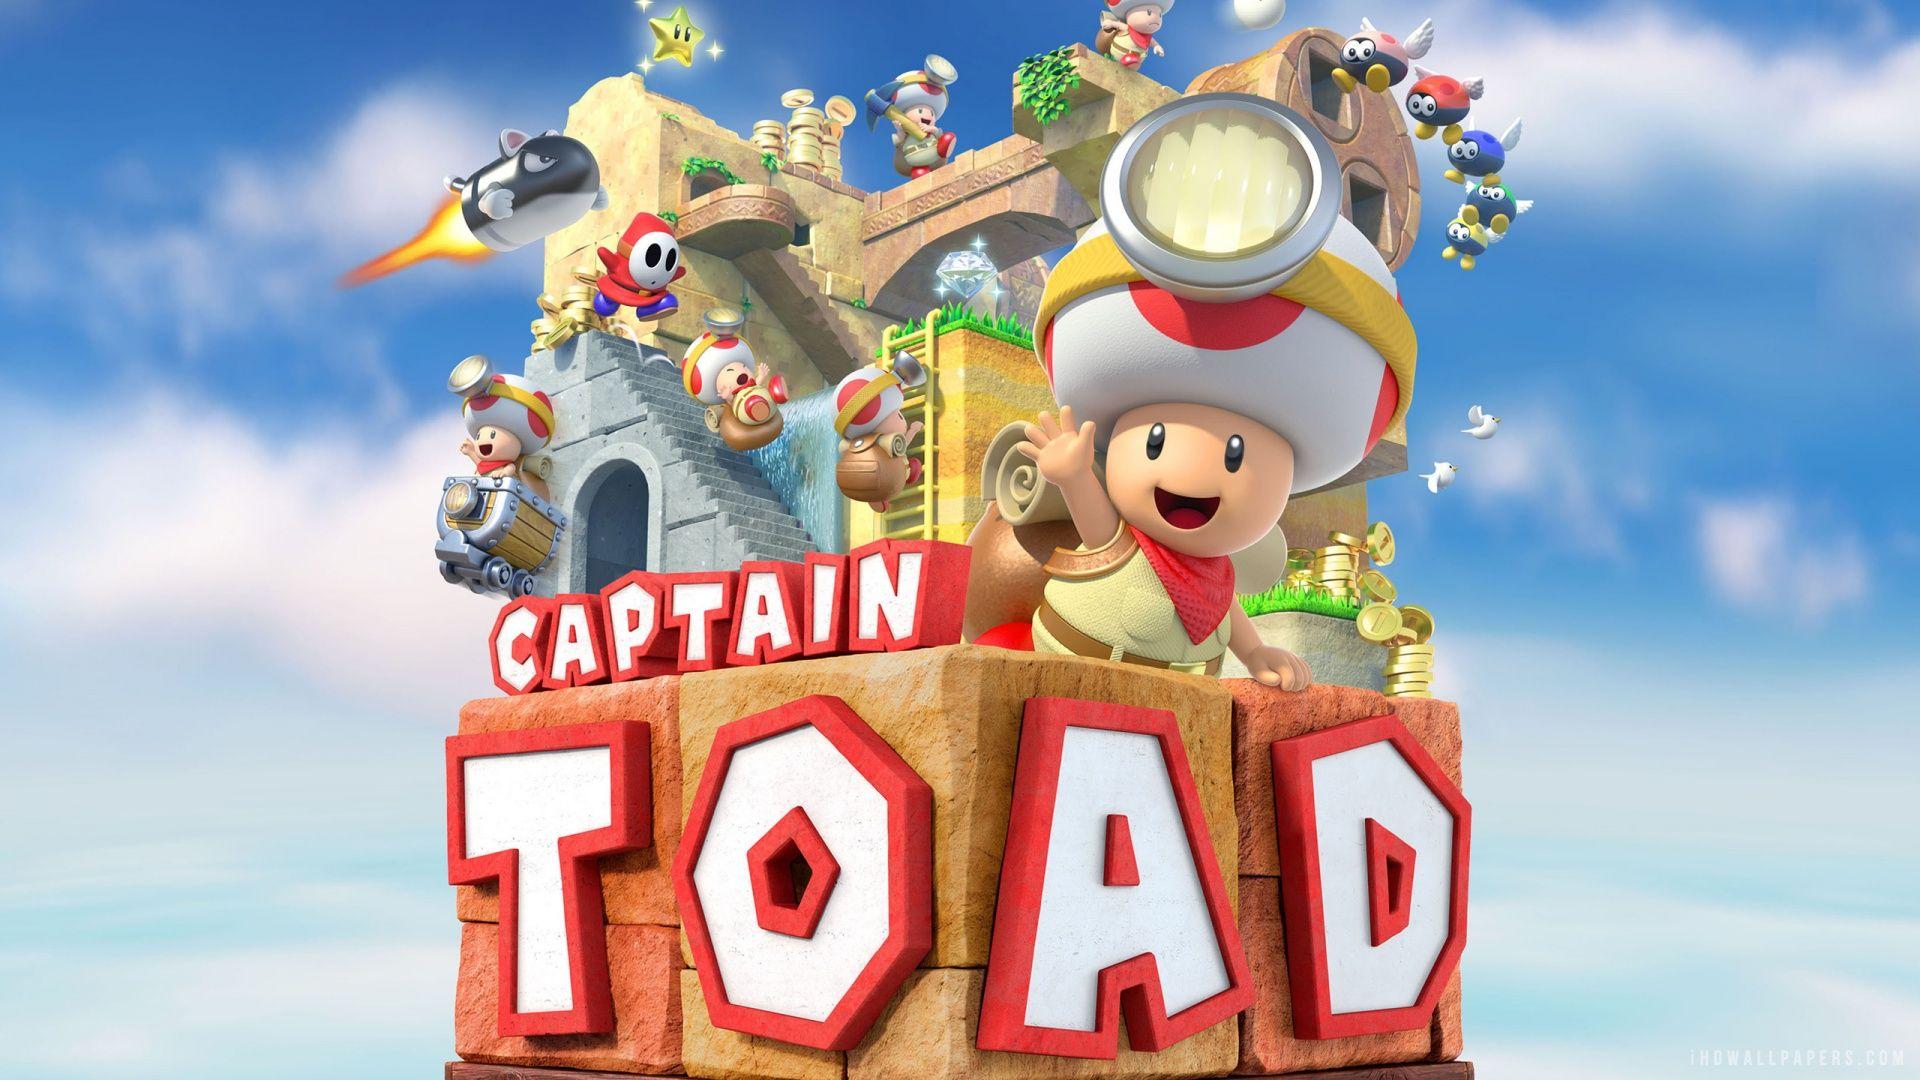 Captain Toad Treasure Tracker Demo now available on the Japanese